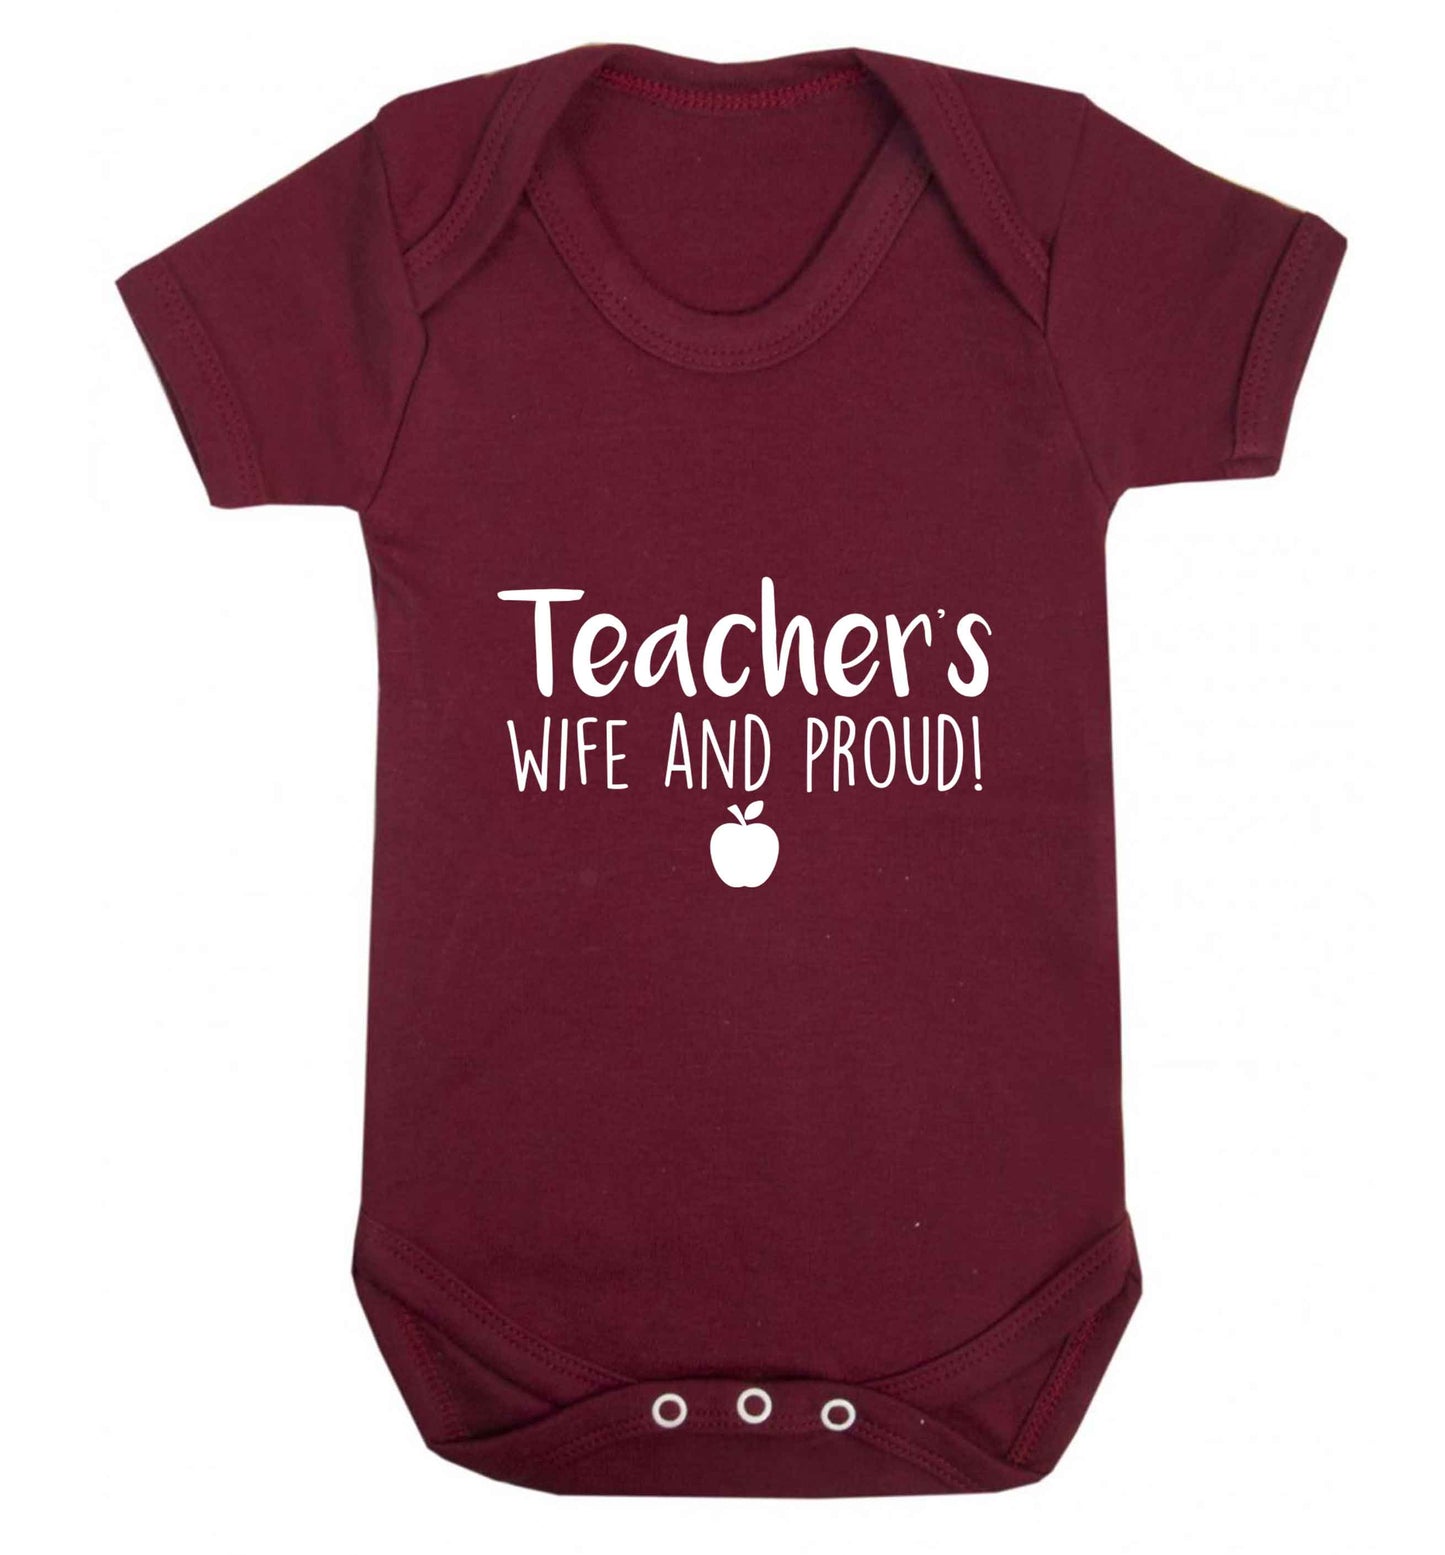 Teachers wife and proud baby vest maroon 18-24 months